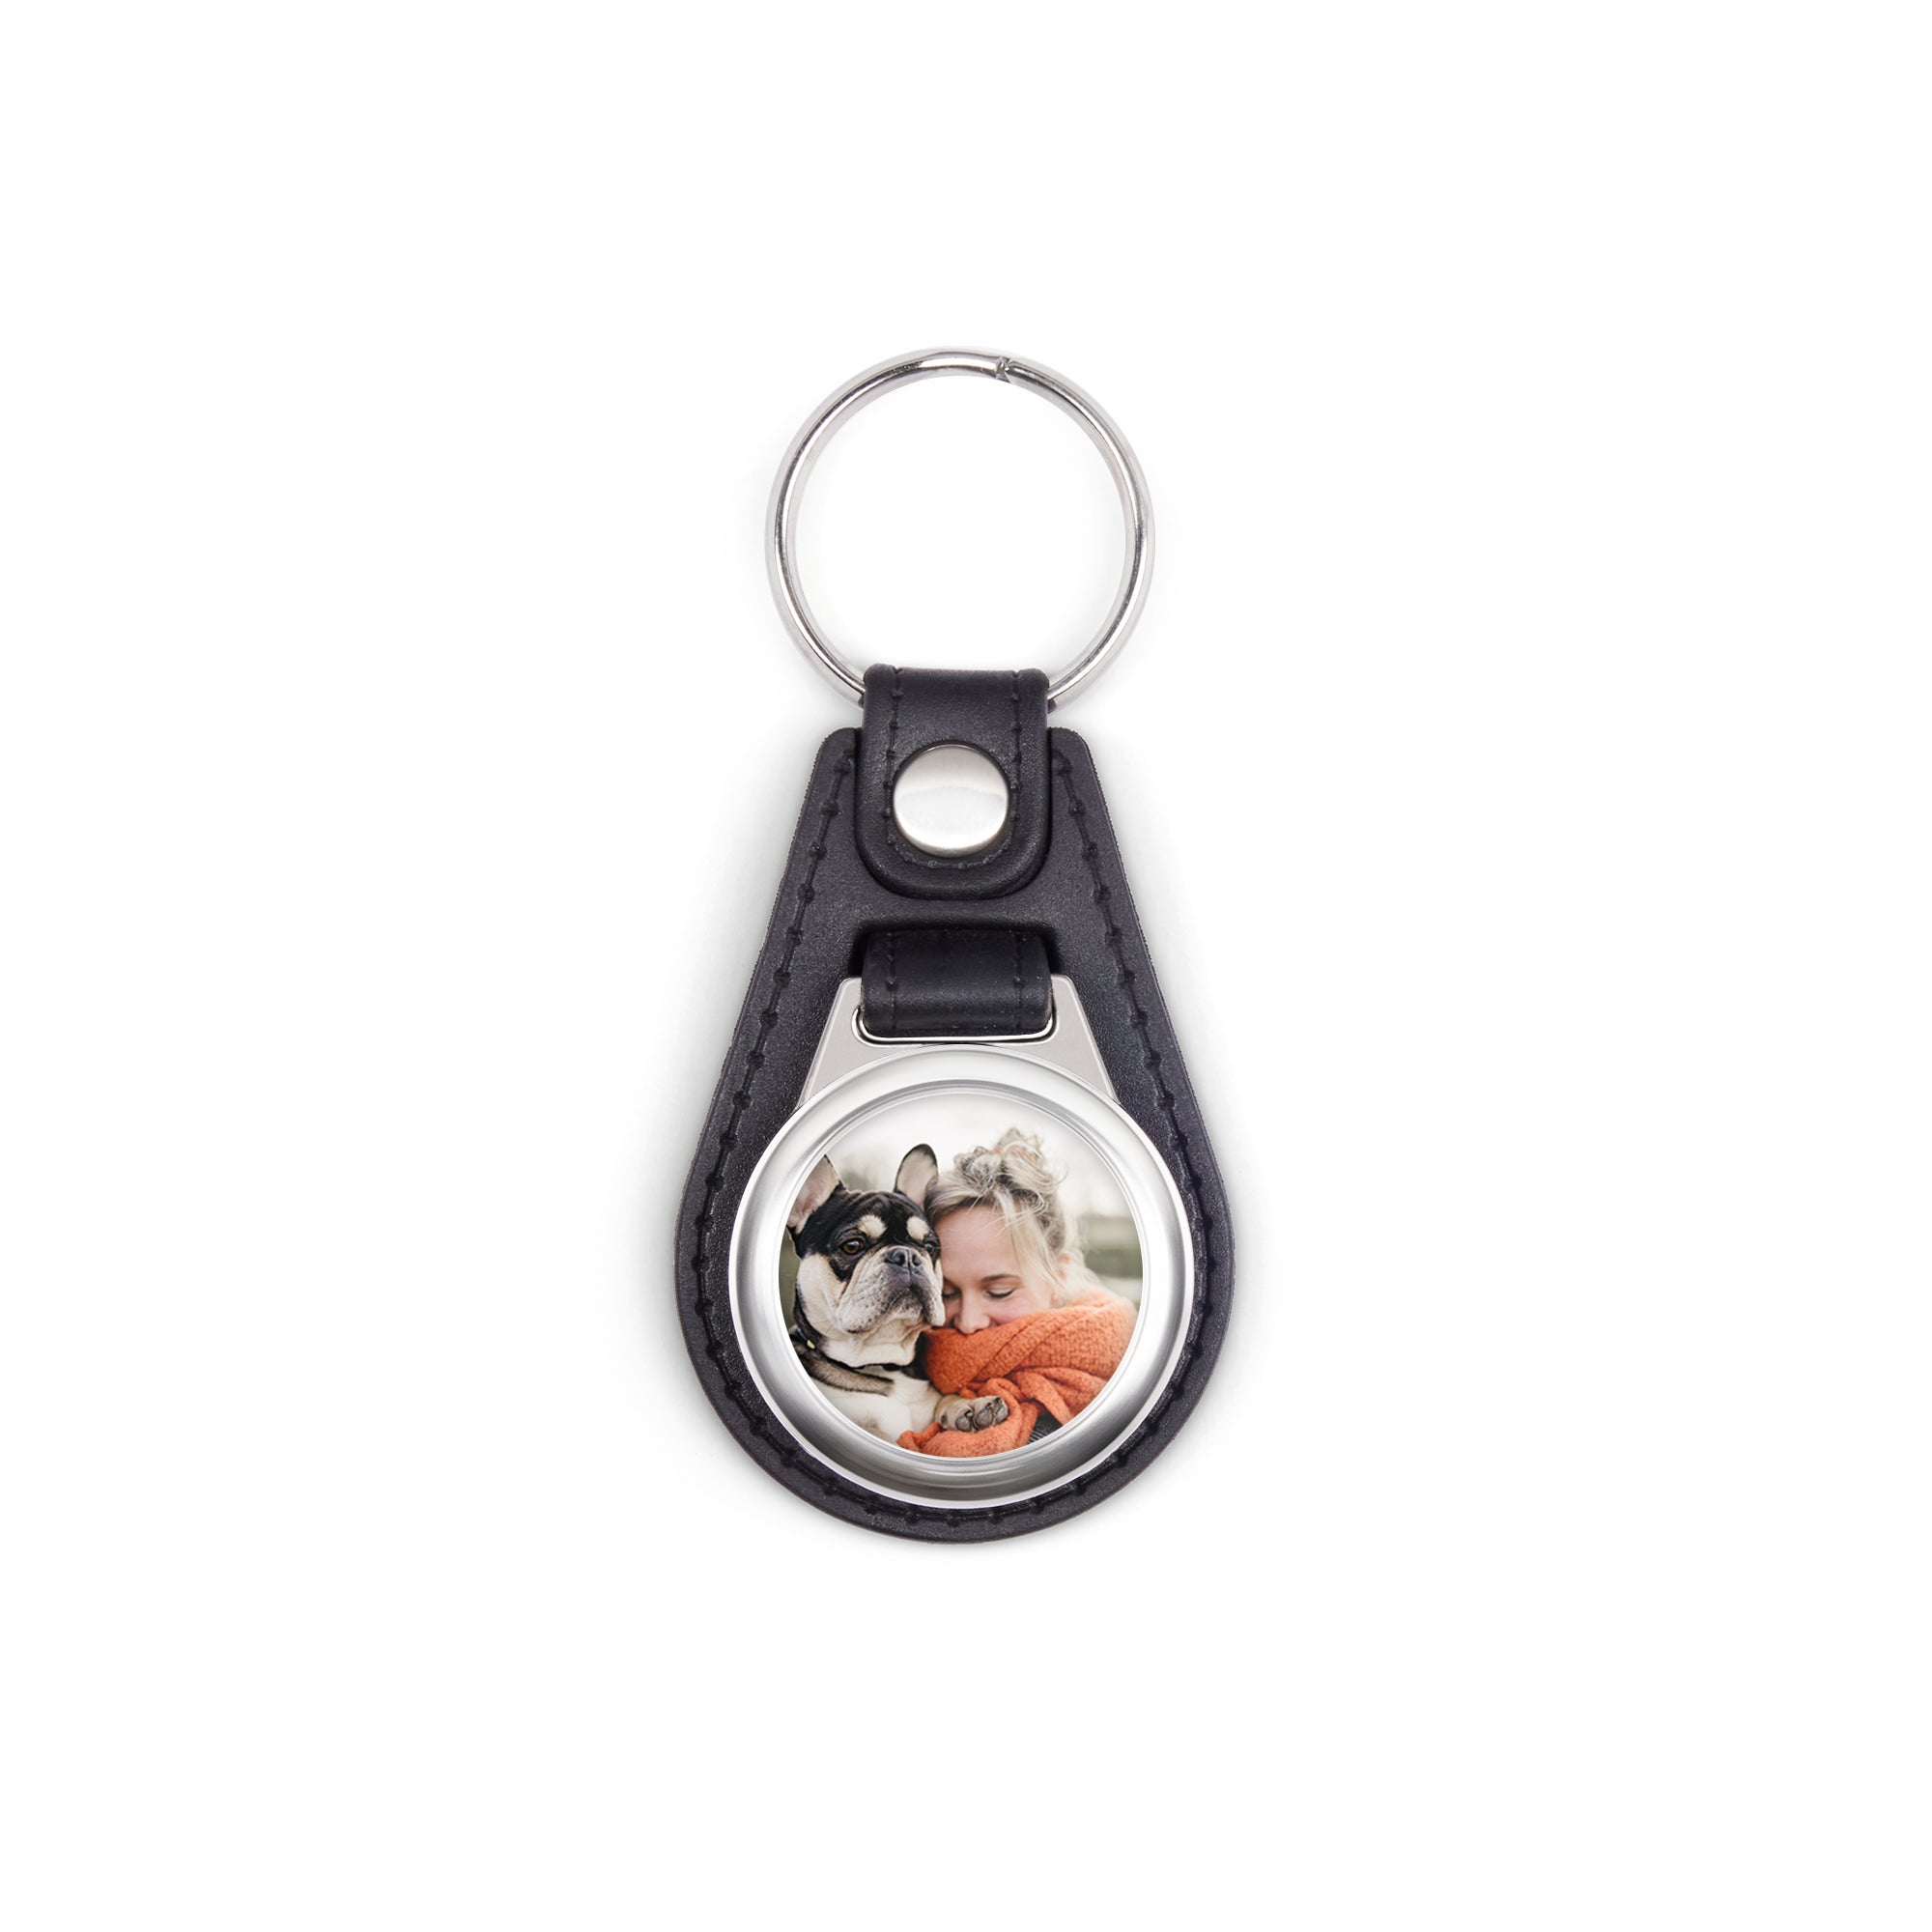 Personalised key ring - Round - Leather